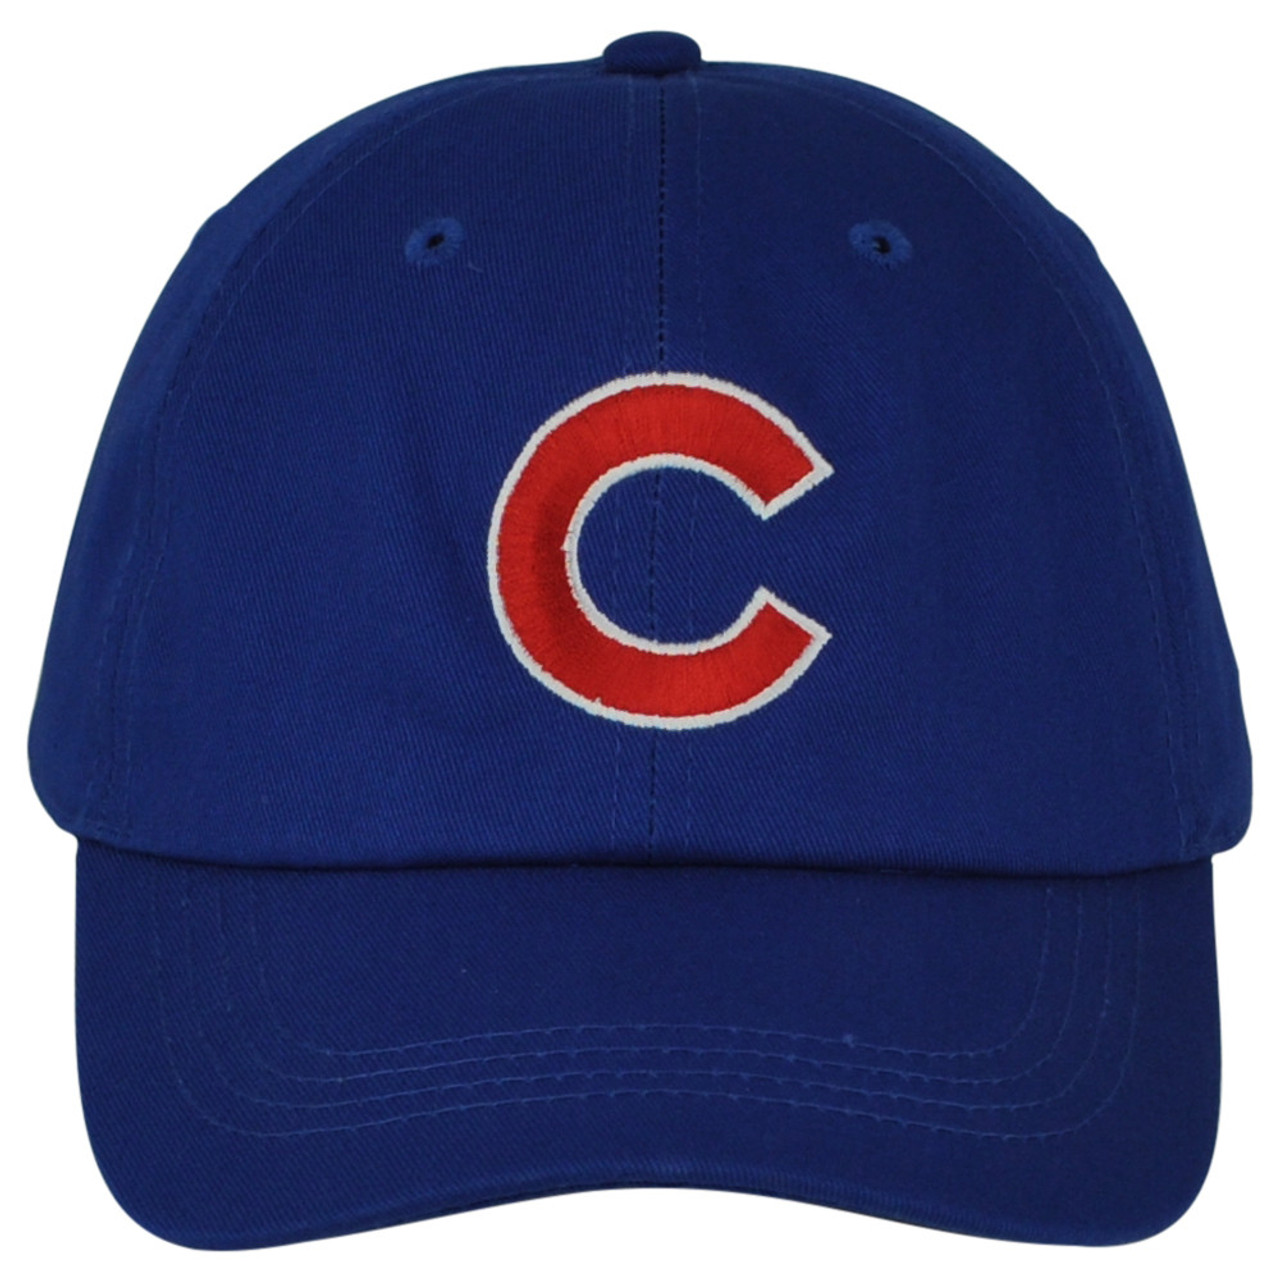 MLB Fan Favorite Chicago Cubs Men Blue Relaxed Curved Bill